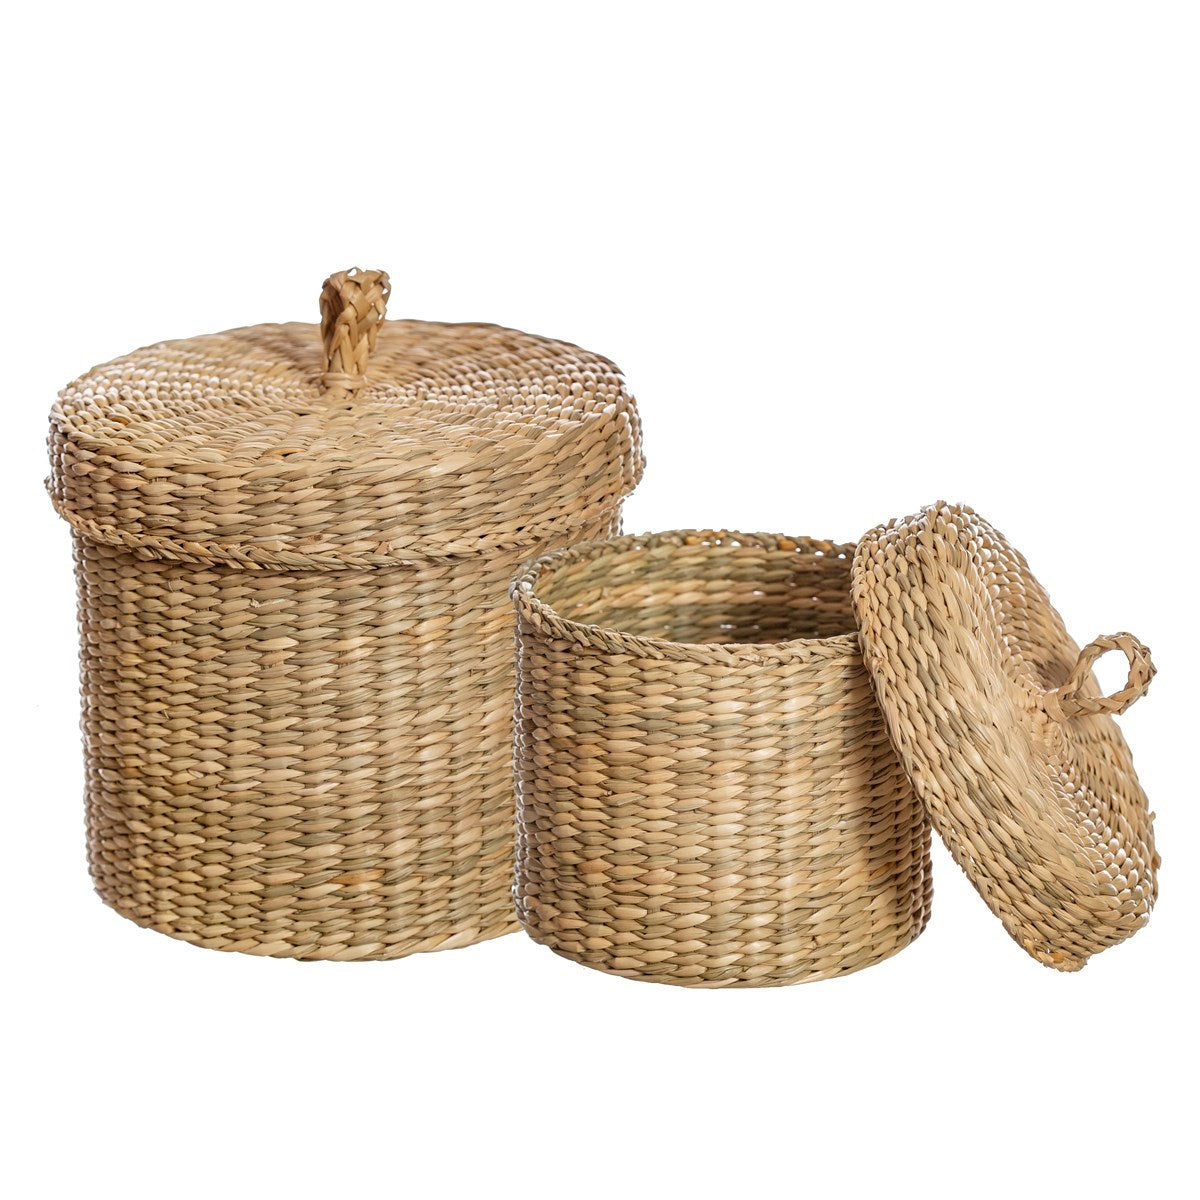 Seagrass Baskets // 2 PACK